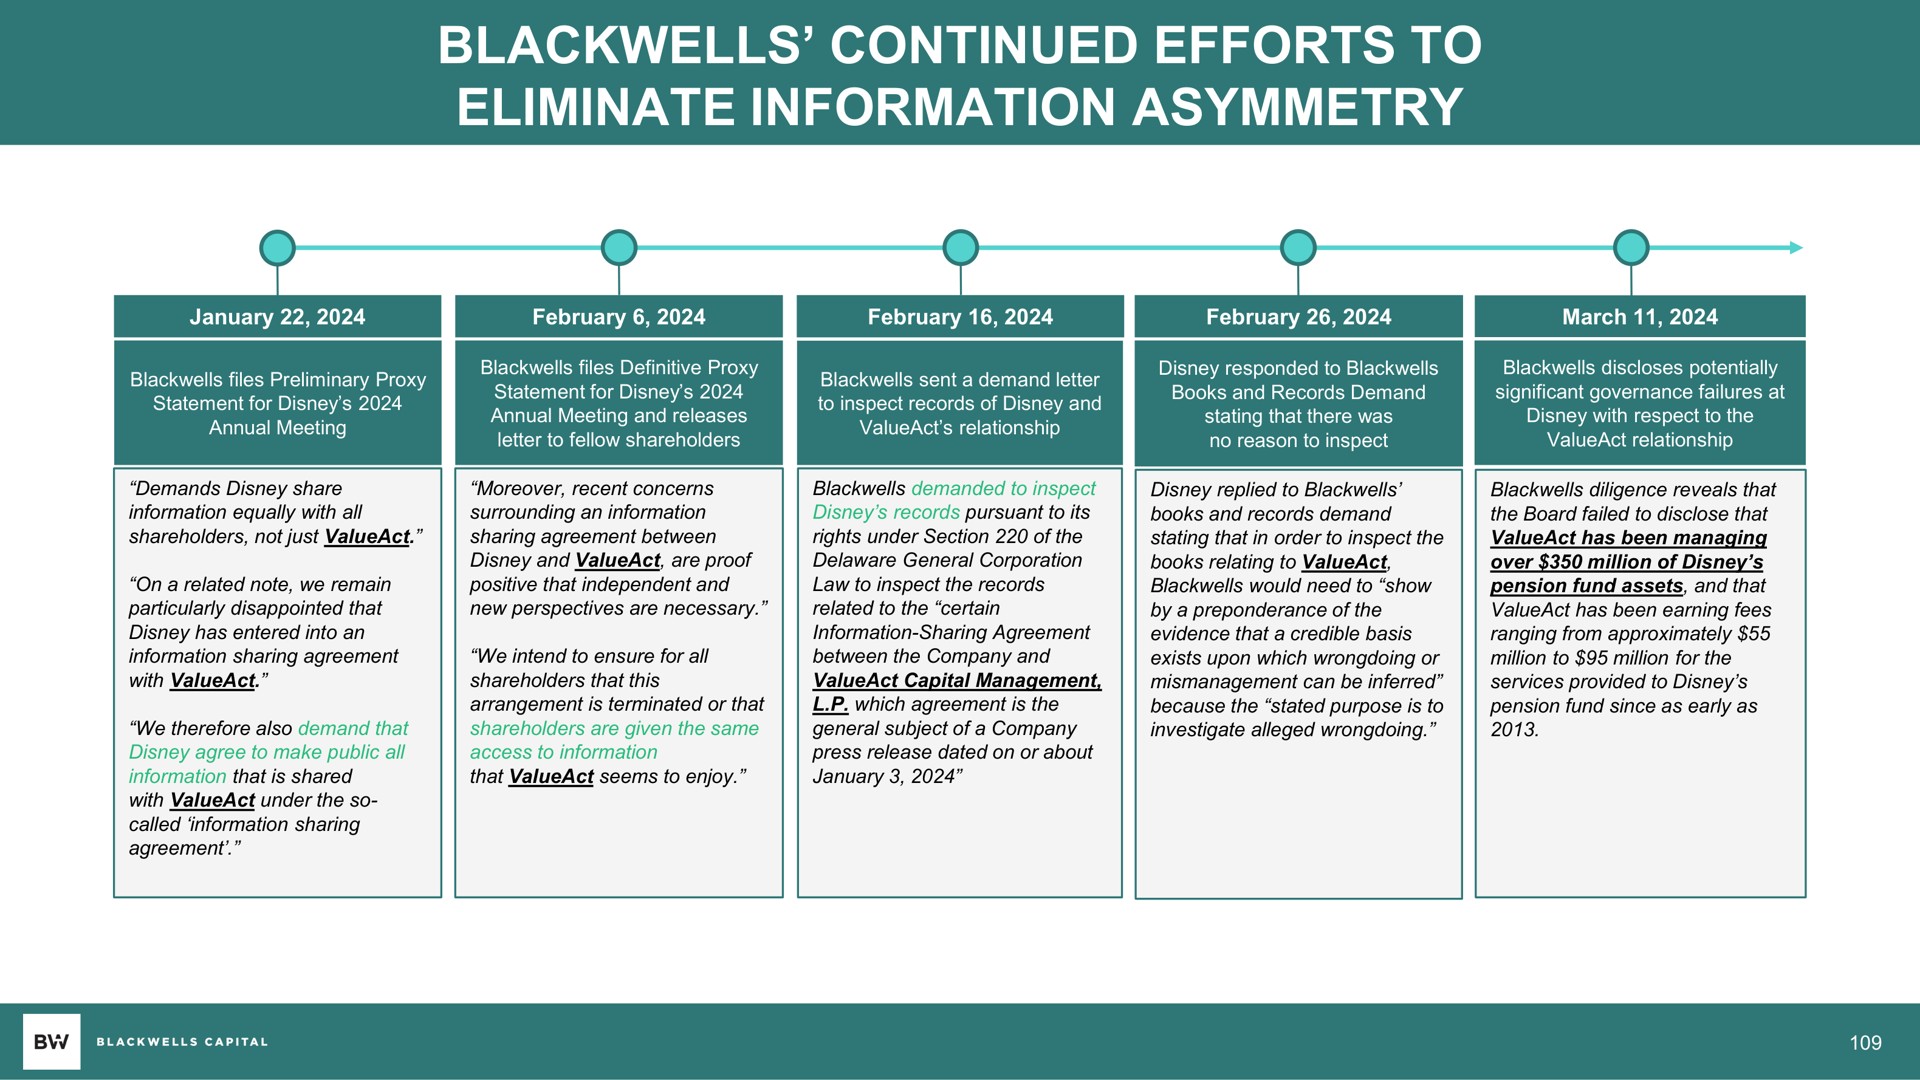 continued efforts to eliminate information asymmetry | Blackwells Capital